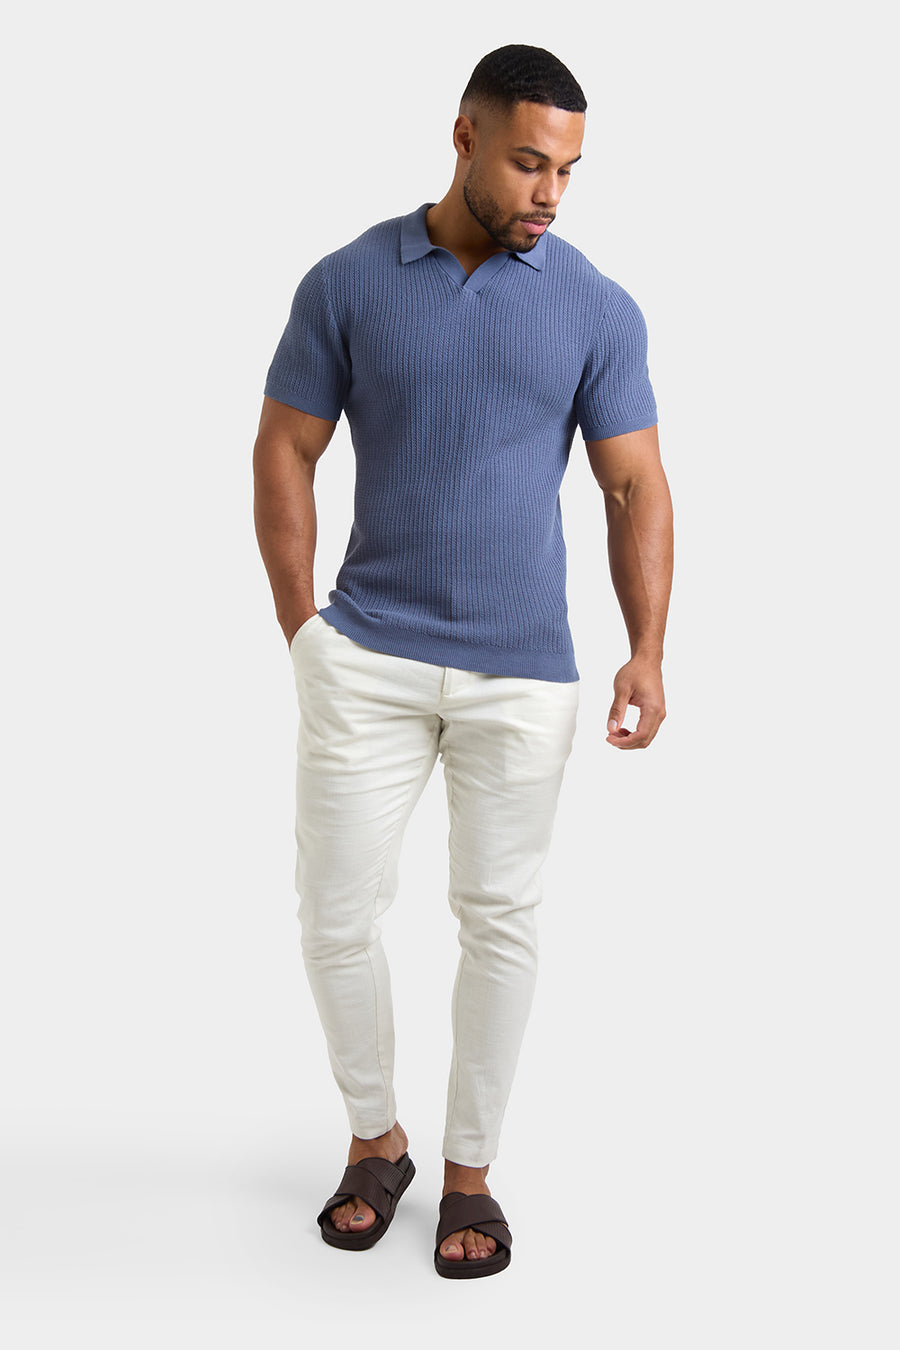 Textured Open Collar Knit Polo in Slate Blue - TAILORED ATHLETE - USA